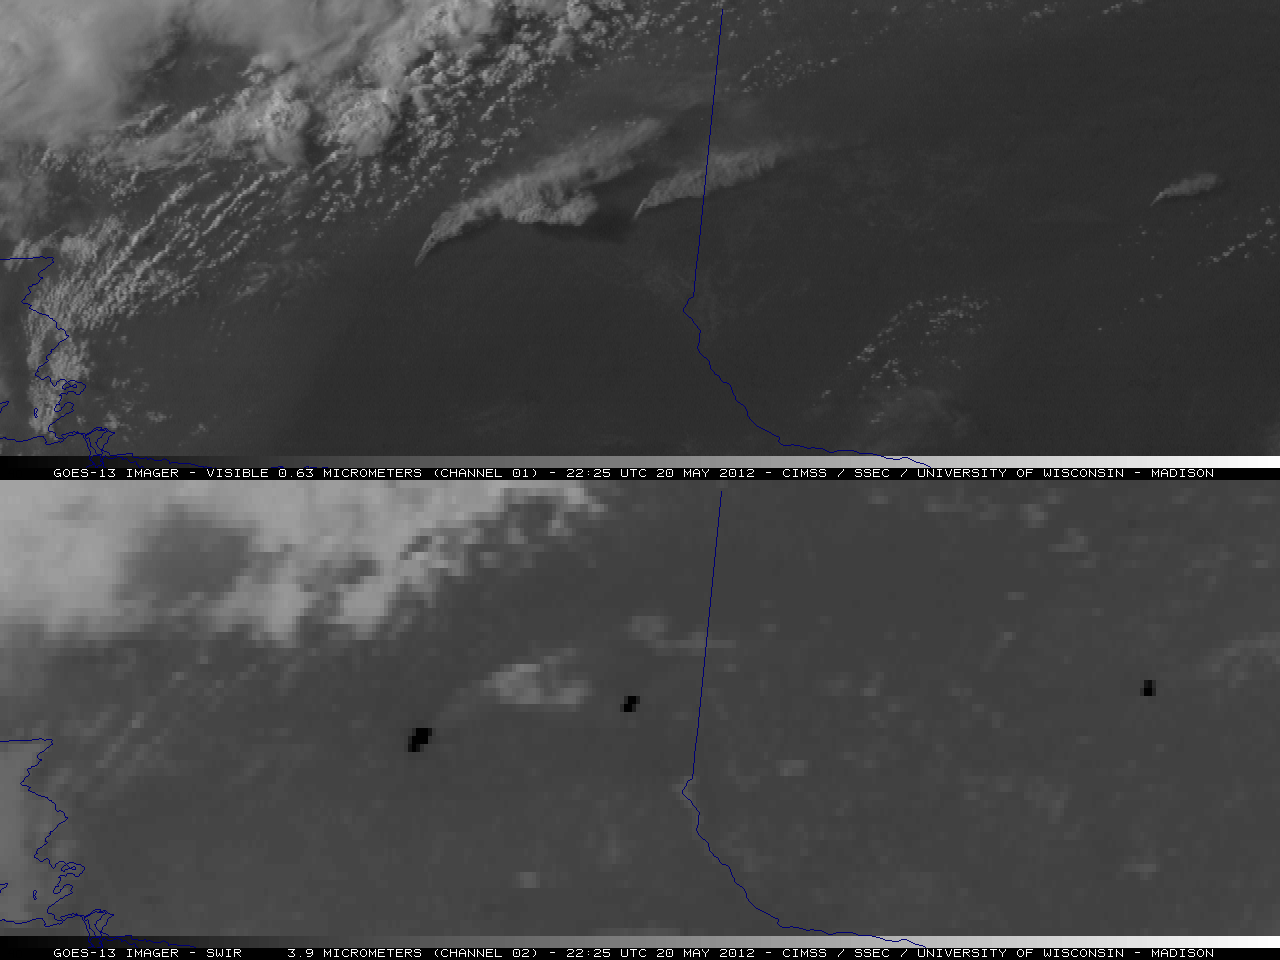 GOES-13 0.63 Âµm visible and 3.9 Âµm shortwave IR images (click image to play animation)